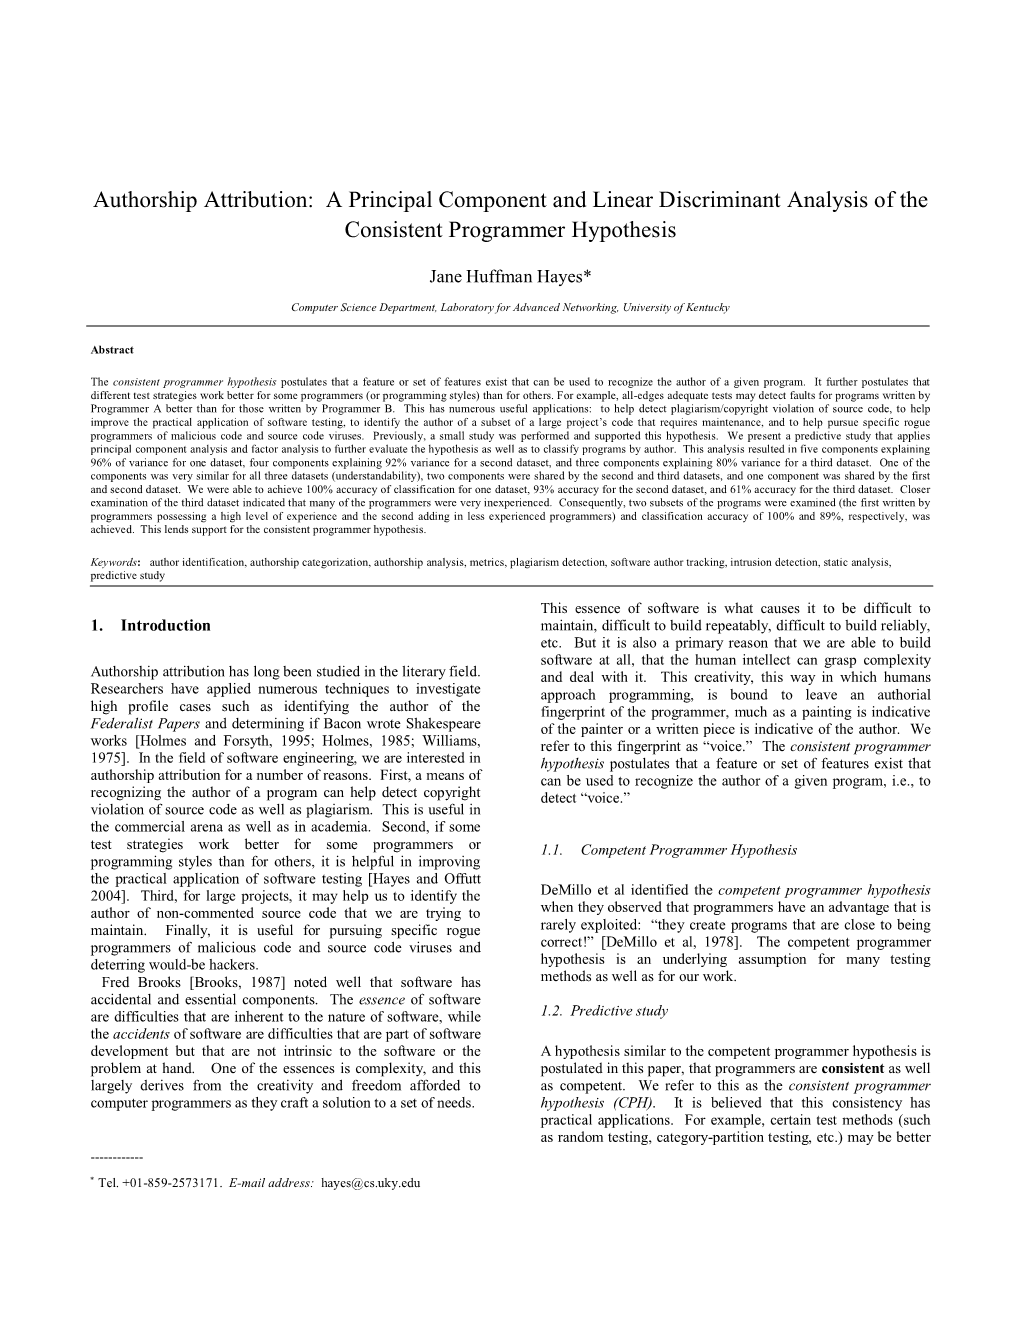 Authorship Attribution: a Principal Component and Linear Discriminant Analysis of the Consistent Programmer Hypothesis